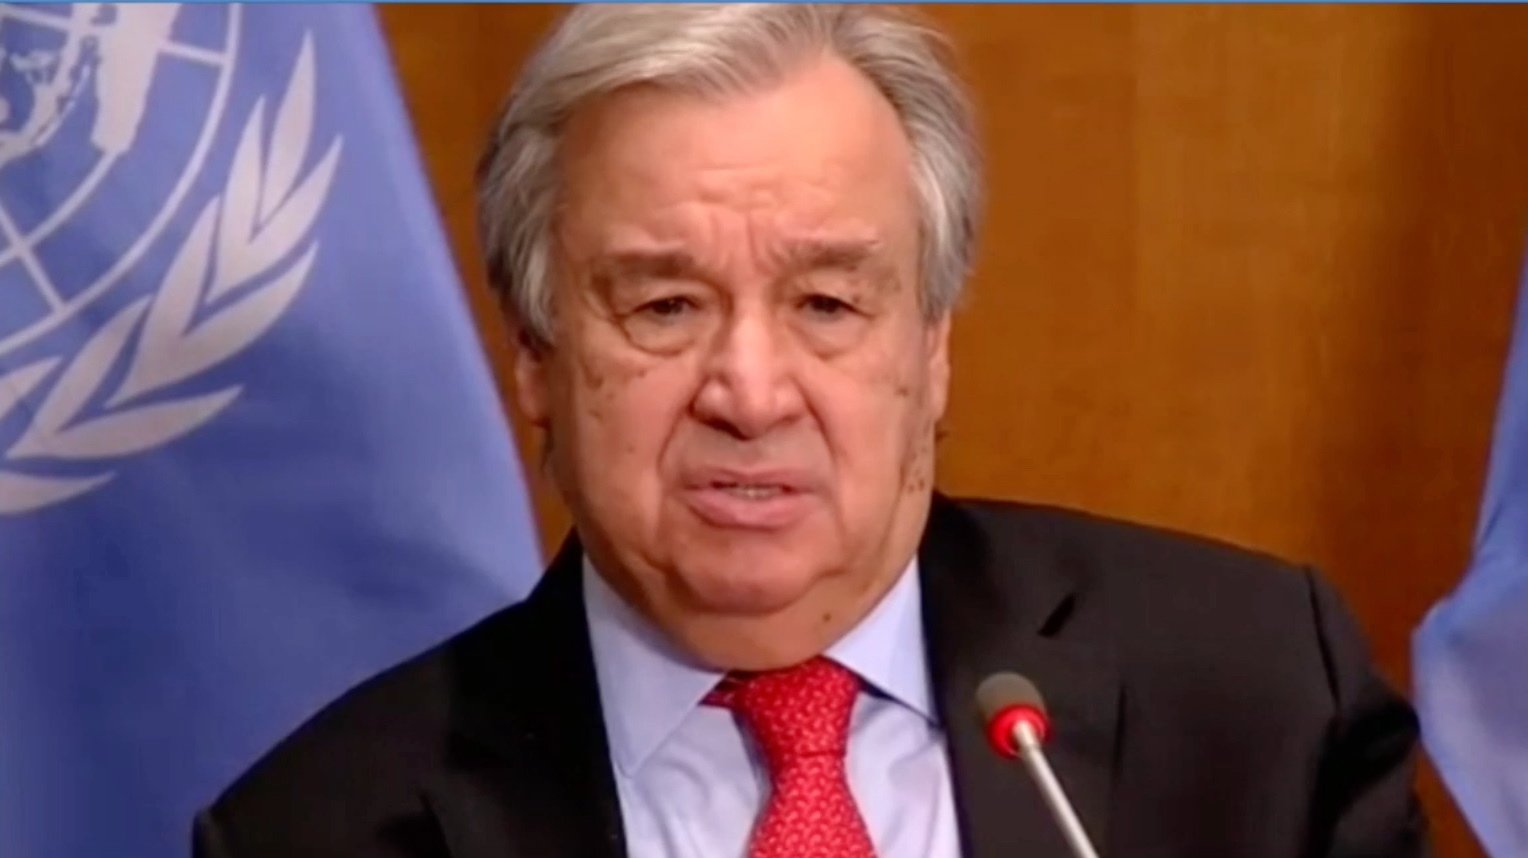 epa08964975 A still image obtained from a live video feed by the World Economic Forum (WEF) shows Secretary-General of the United Nations Antonio Guterres as he delivers Special Address during a virtual meeting of the World Economic Forum, 25 January 2021. The World Economic Forum (WEF) was scheduled to take place in Davos. Due to the Coronavirus outbreak, it will be held online in a digital format from January, 25-29.  EPA/PASCAL BITZ / WEF HANDOUT MANDATORY CREDIT / HANDOUT EDITORIAL USE ONLY/NO SALES